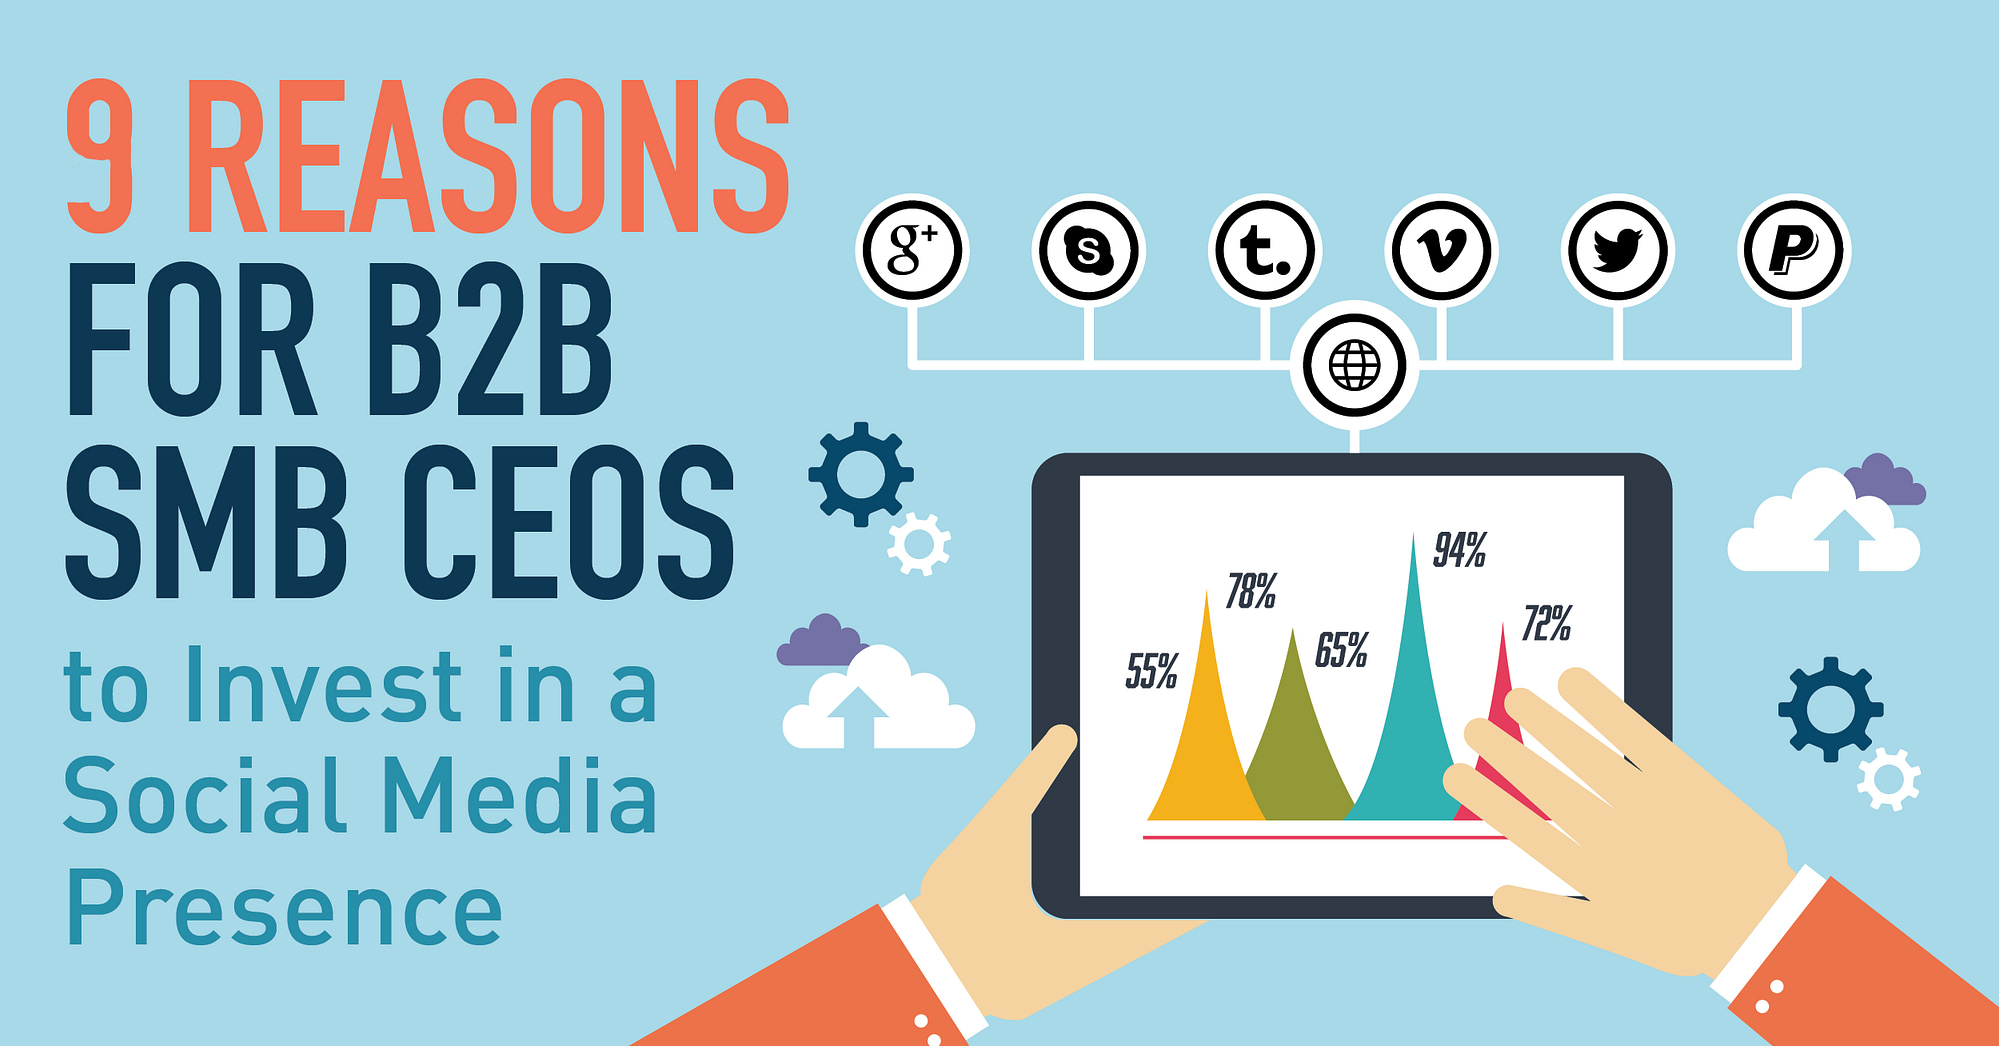 9 Reasons for SMB CEOs to Invest in their B2B Social Media Strategy